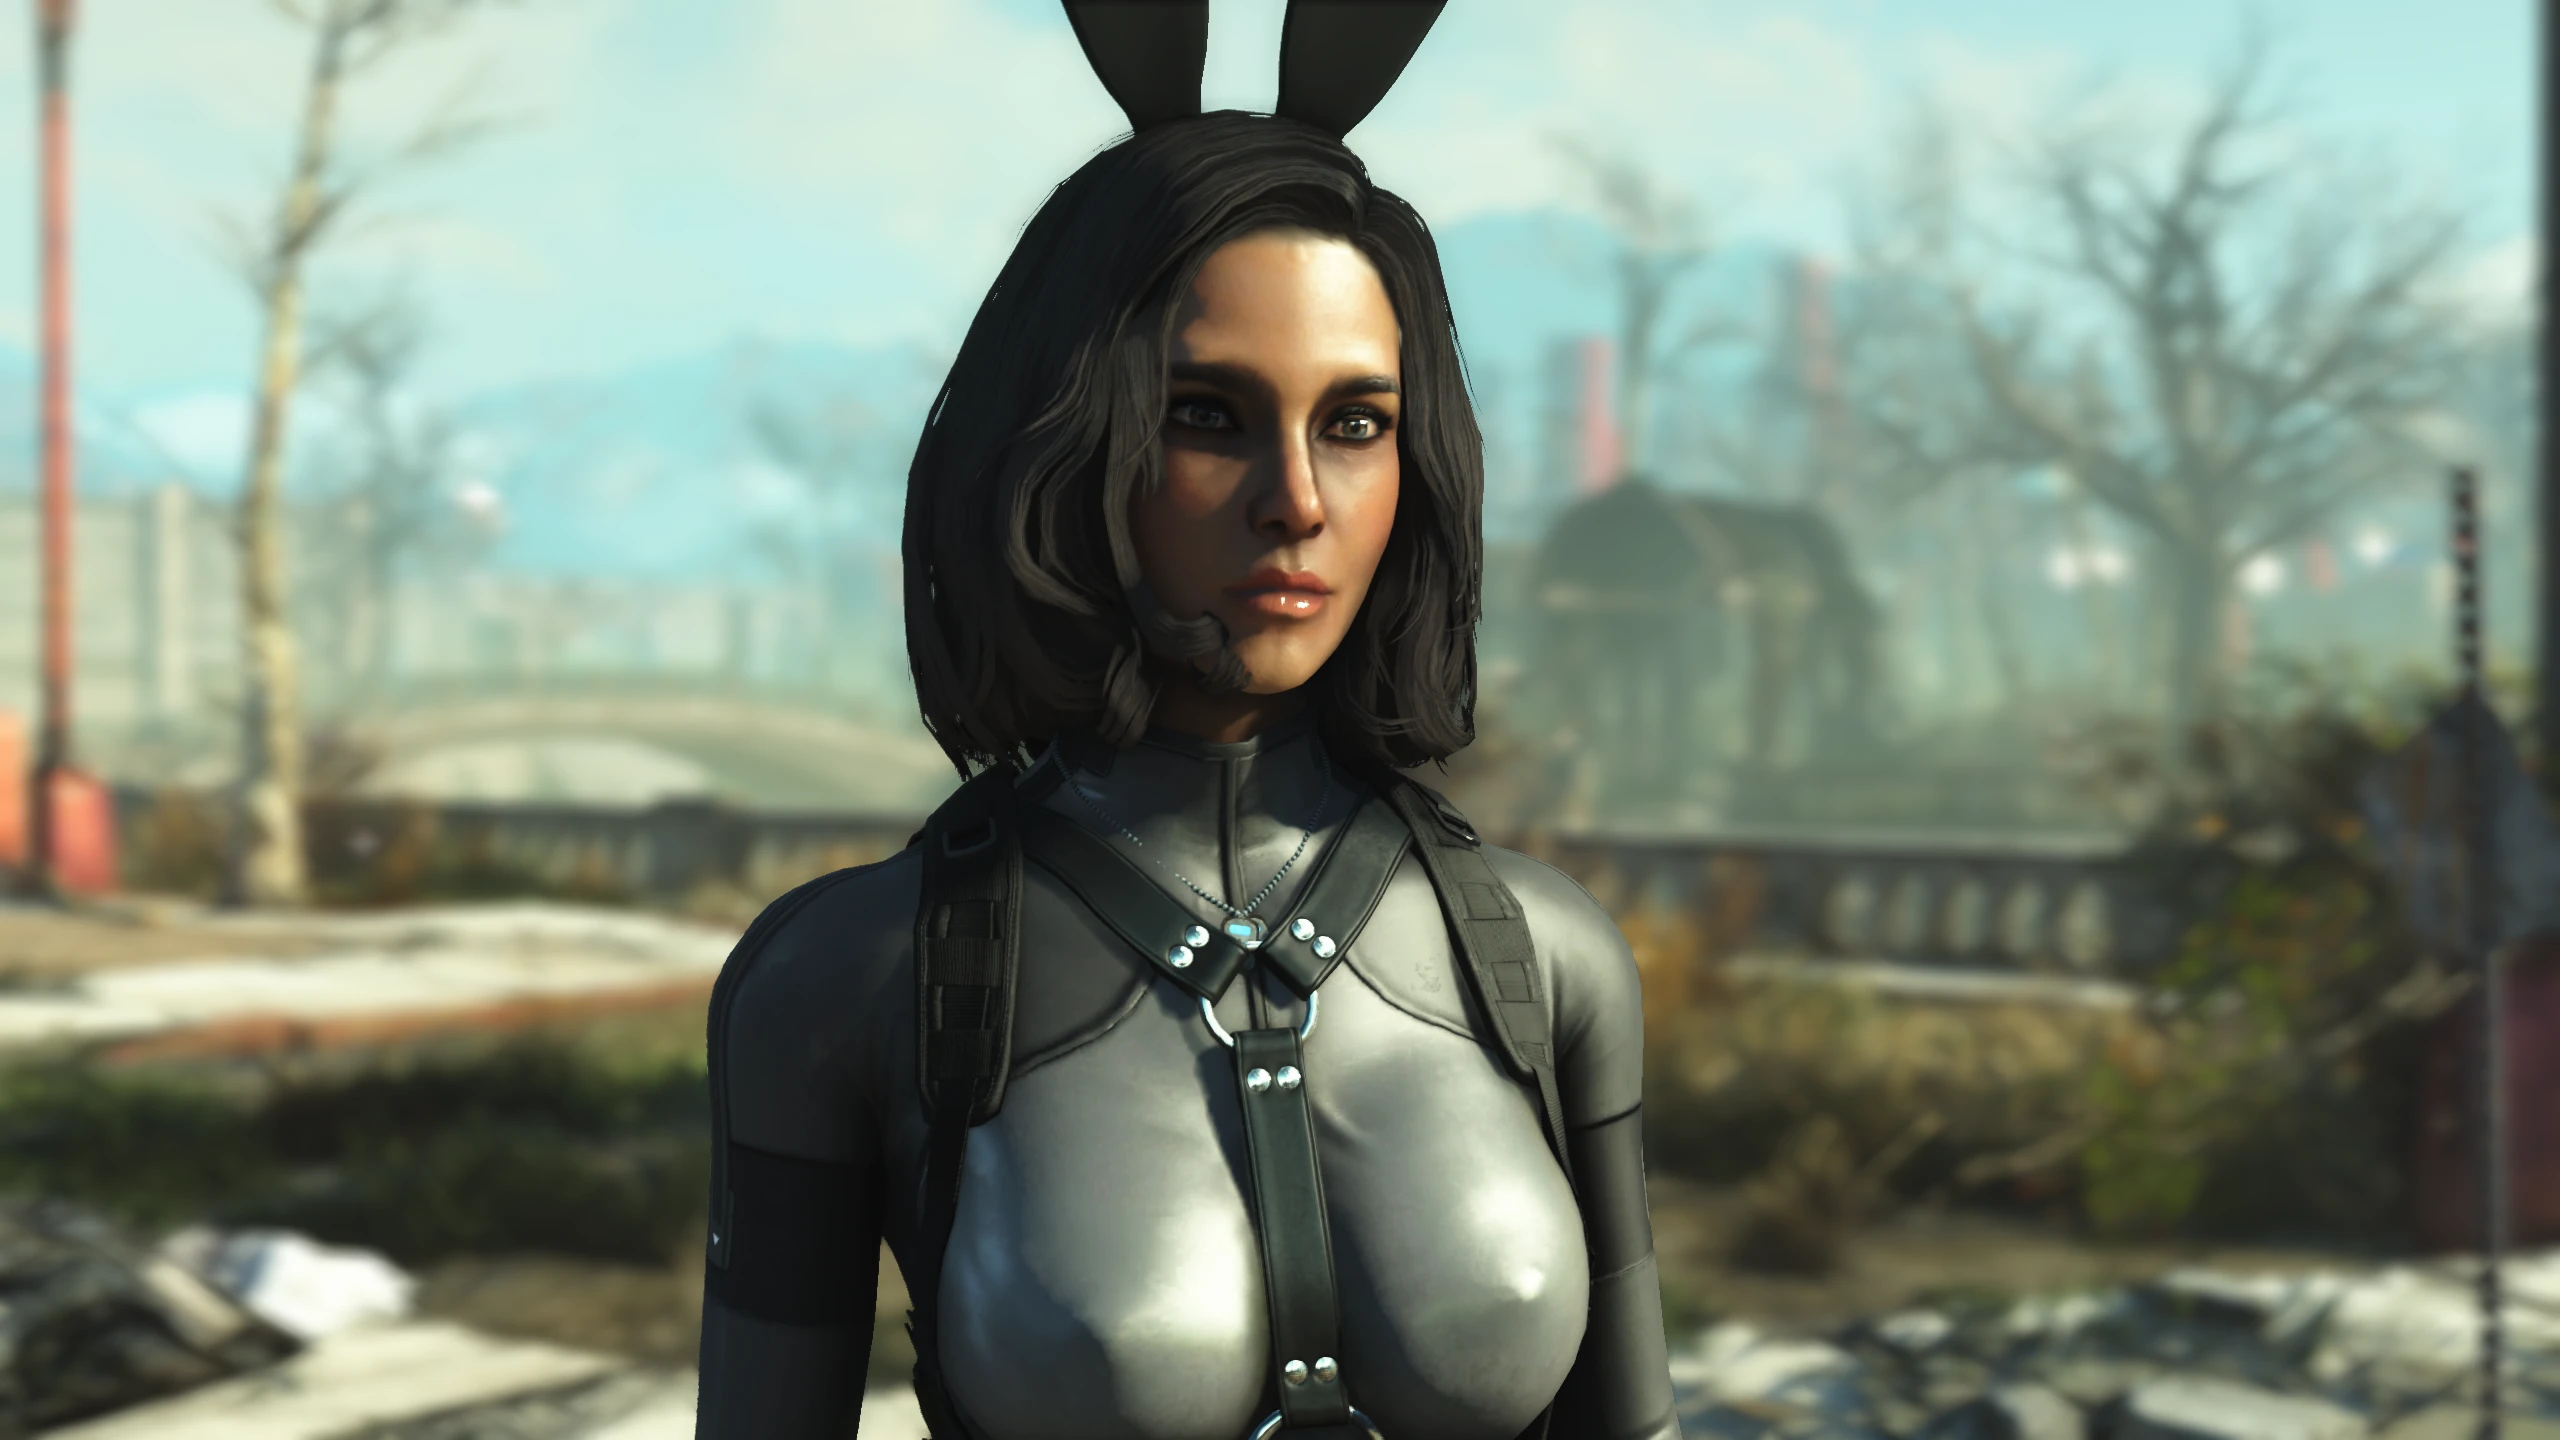 Mods at Fallout 4 Nexus - Mods and community